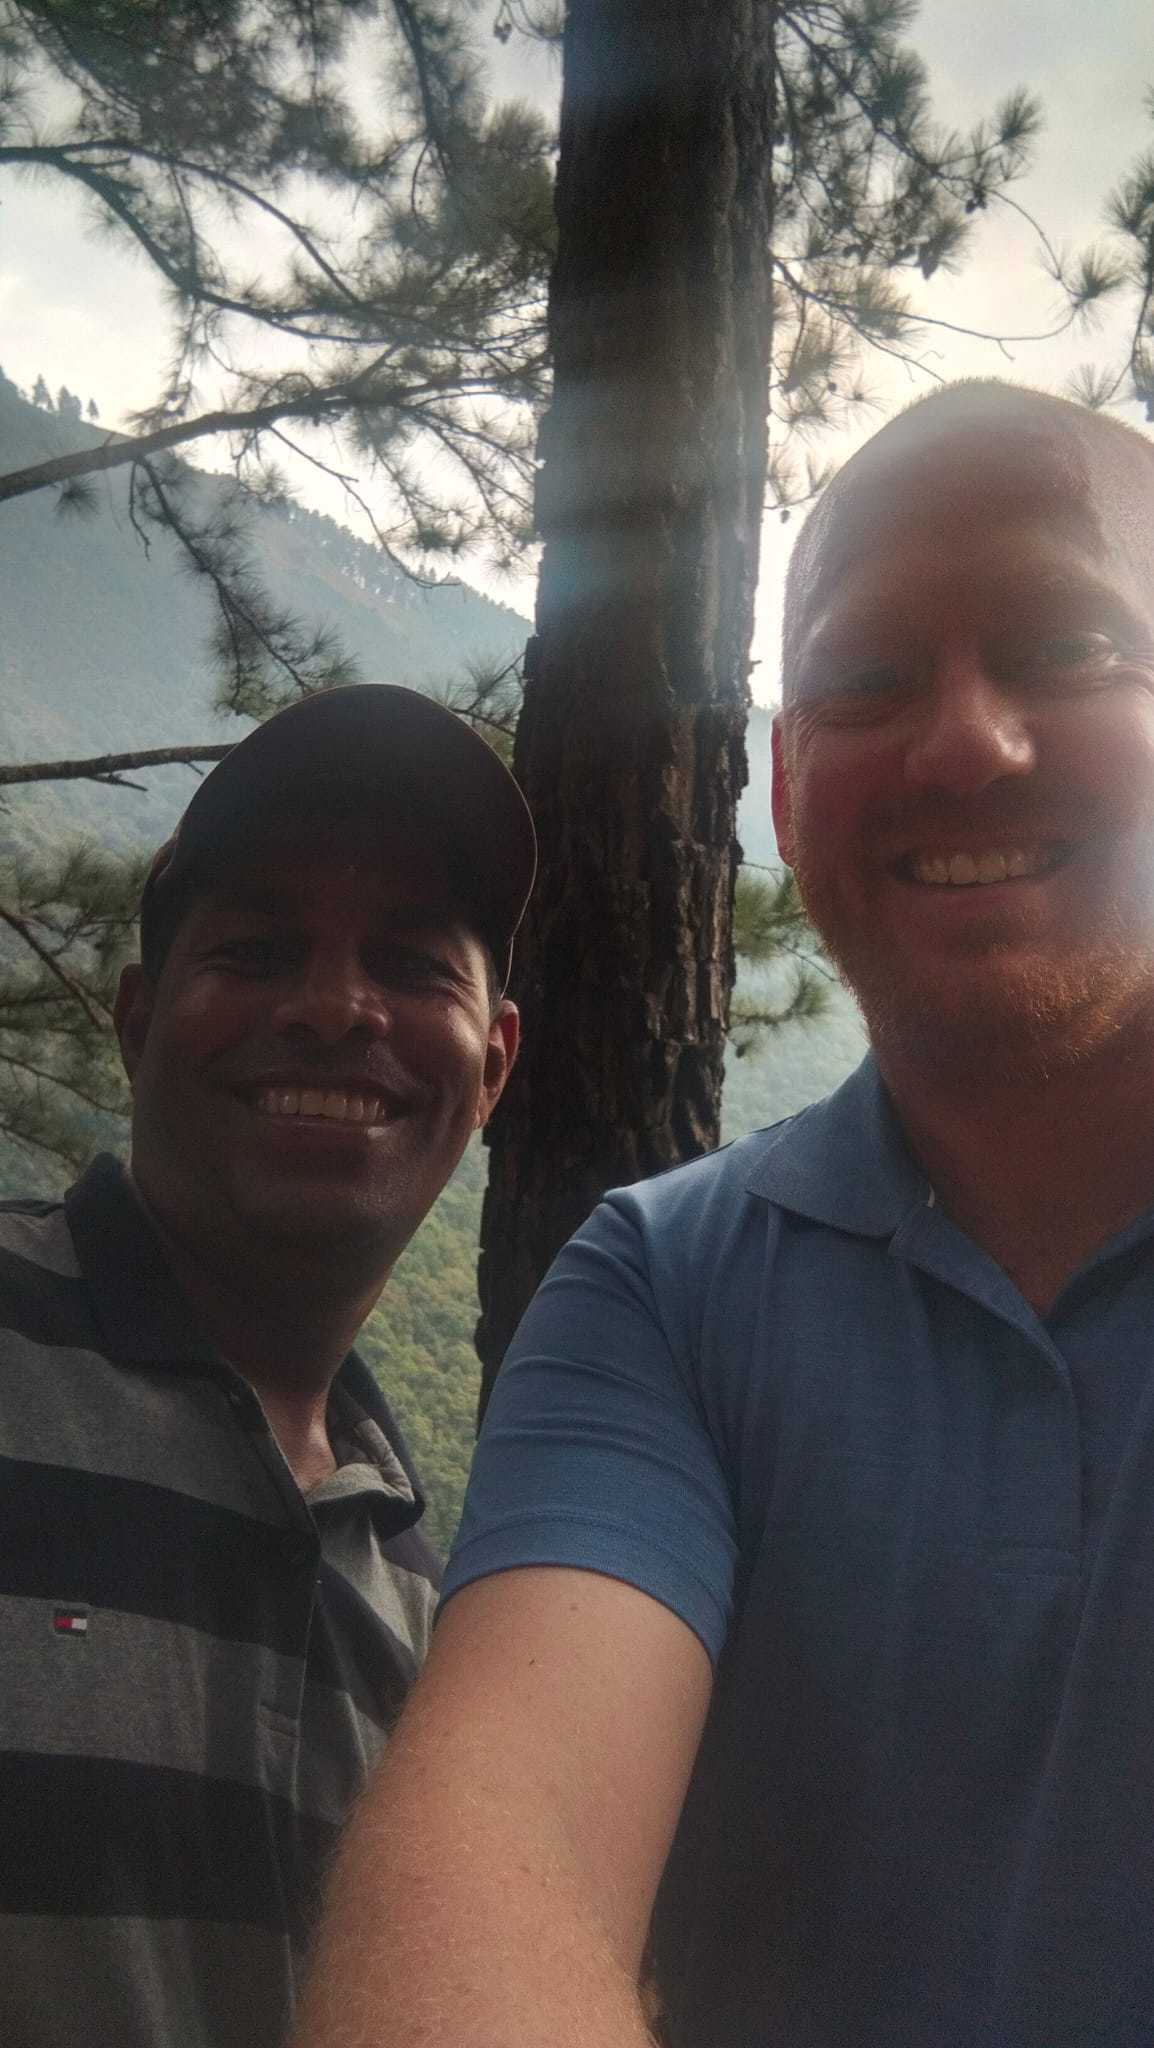 Selfie of a traveller and trekking guide in a forest in Sri Lanka